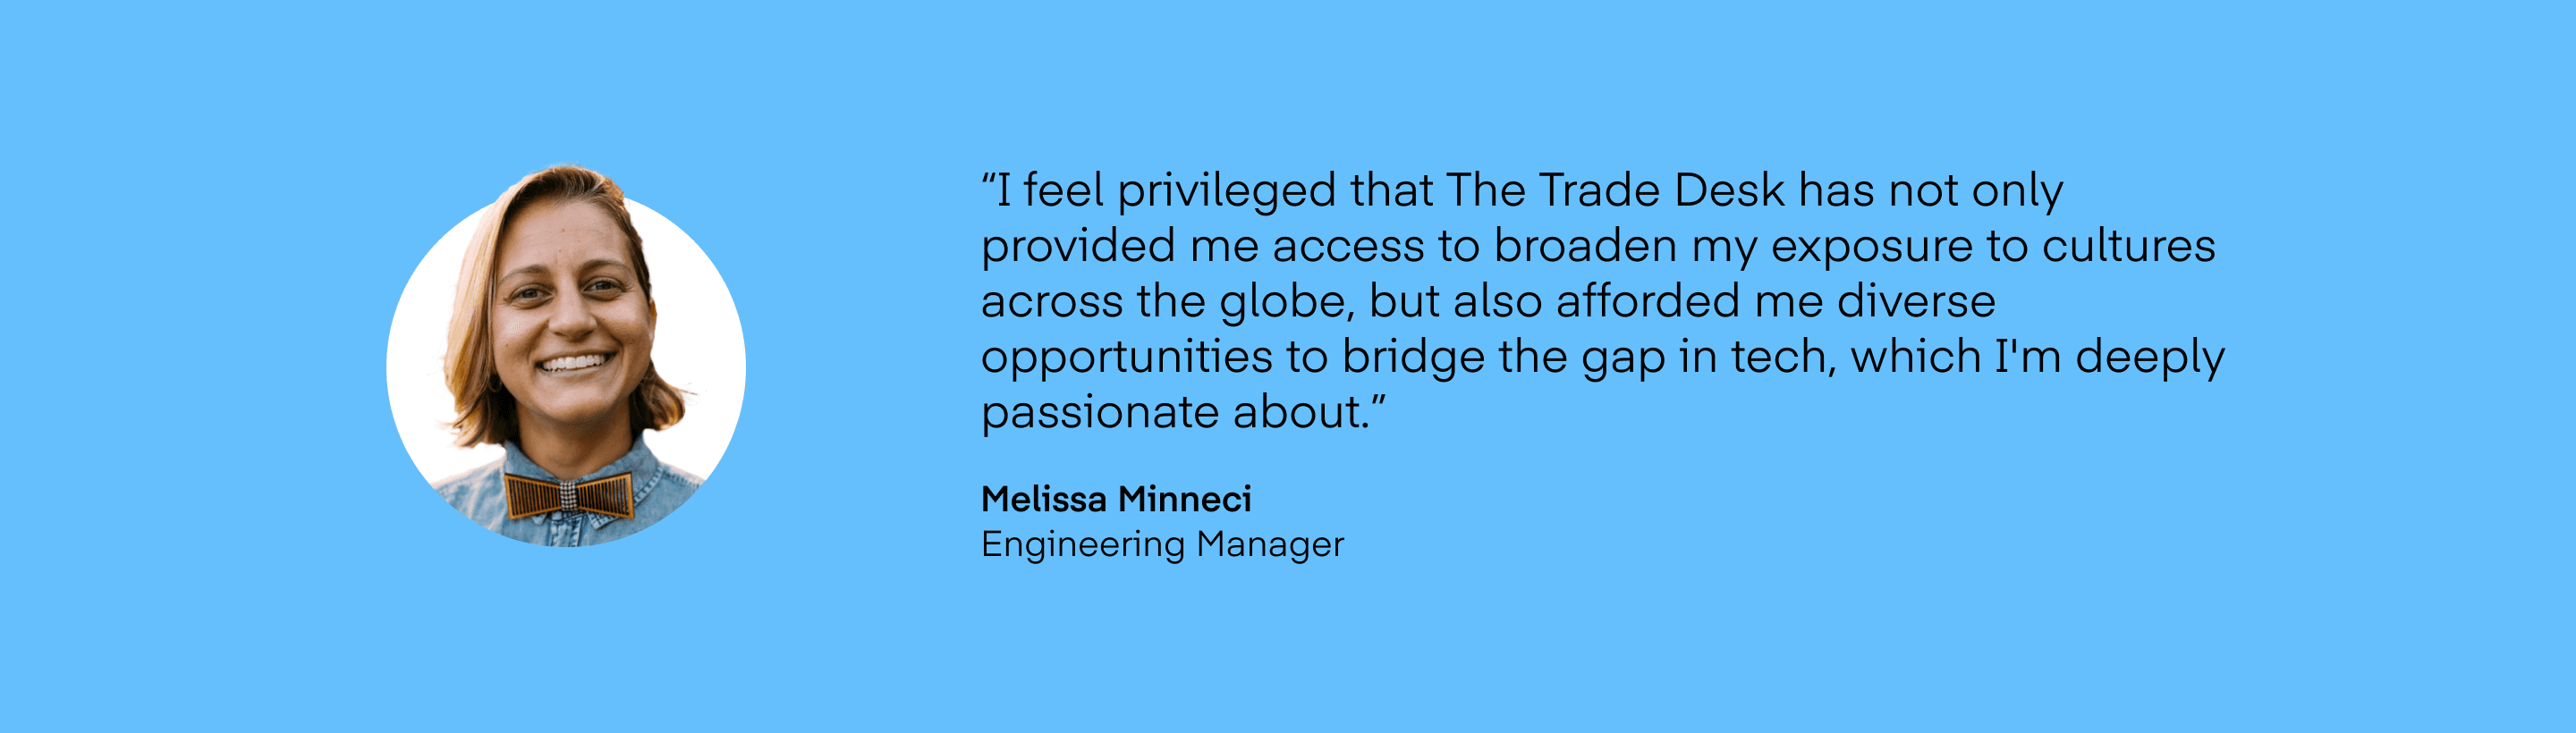 Quote and headshot from Melissa Minneci, Engineering Manager at The Trade Desk on a blue background